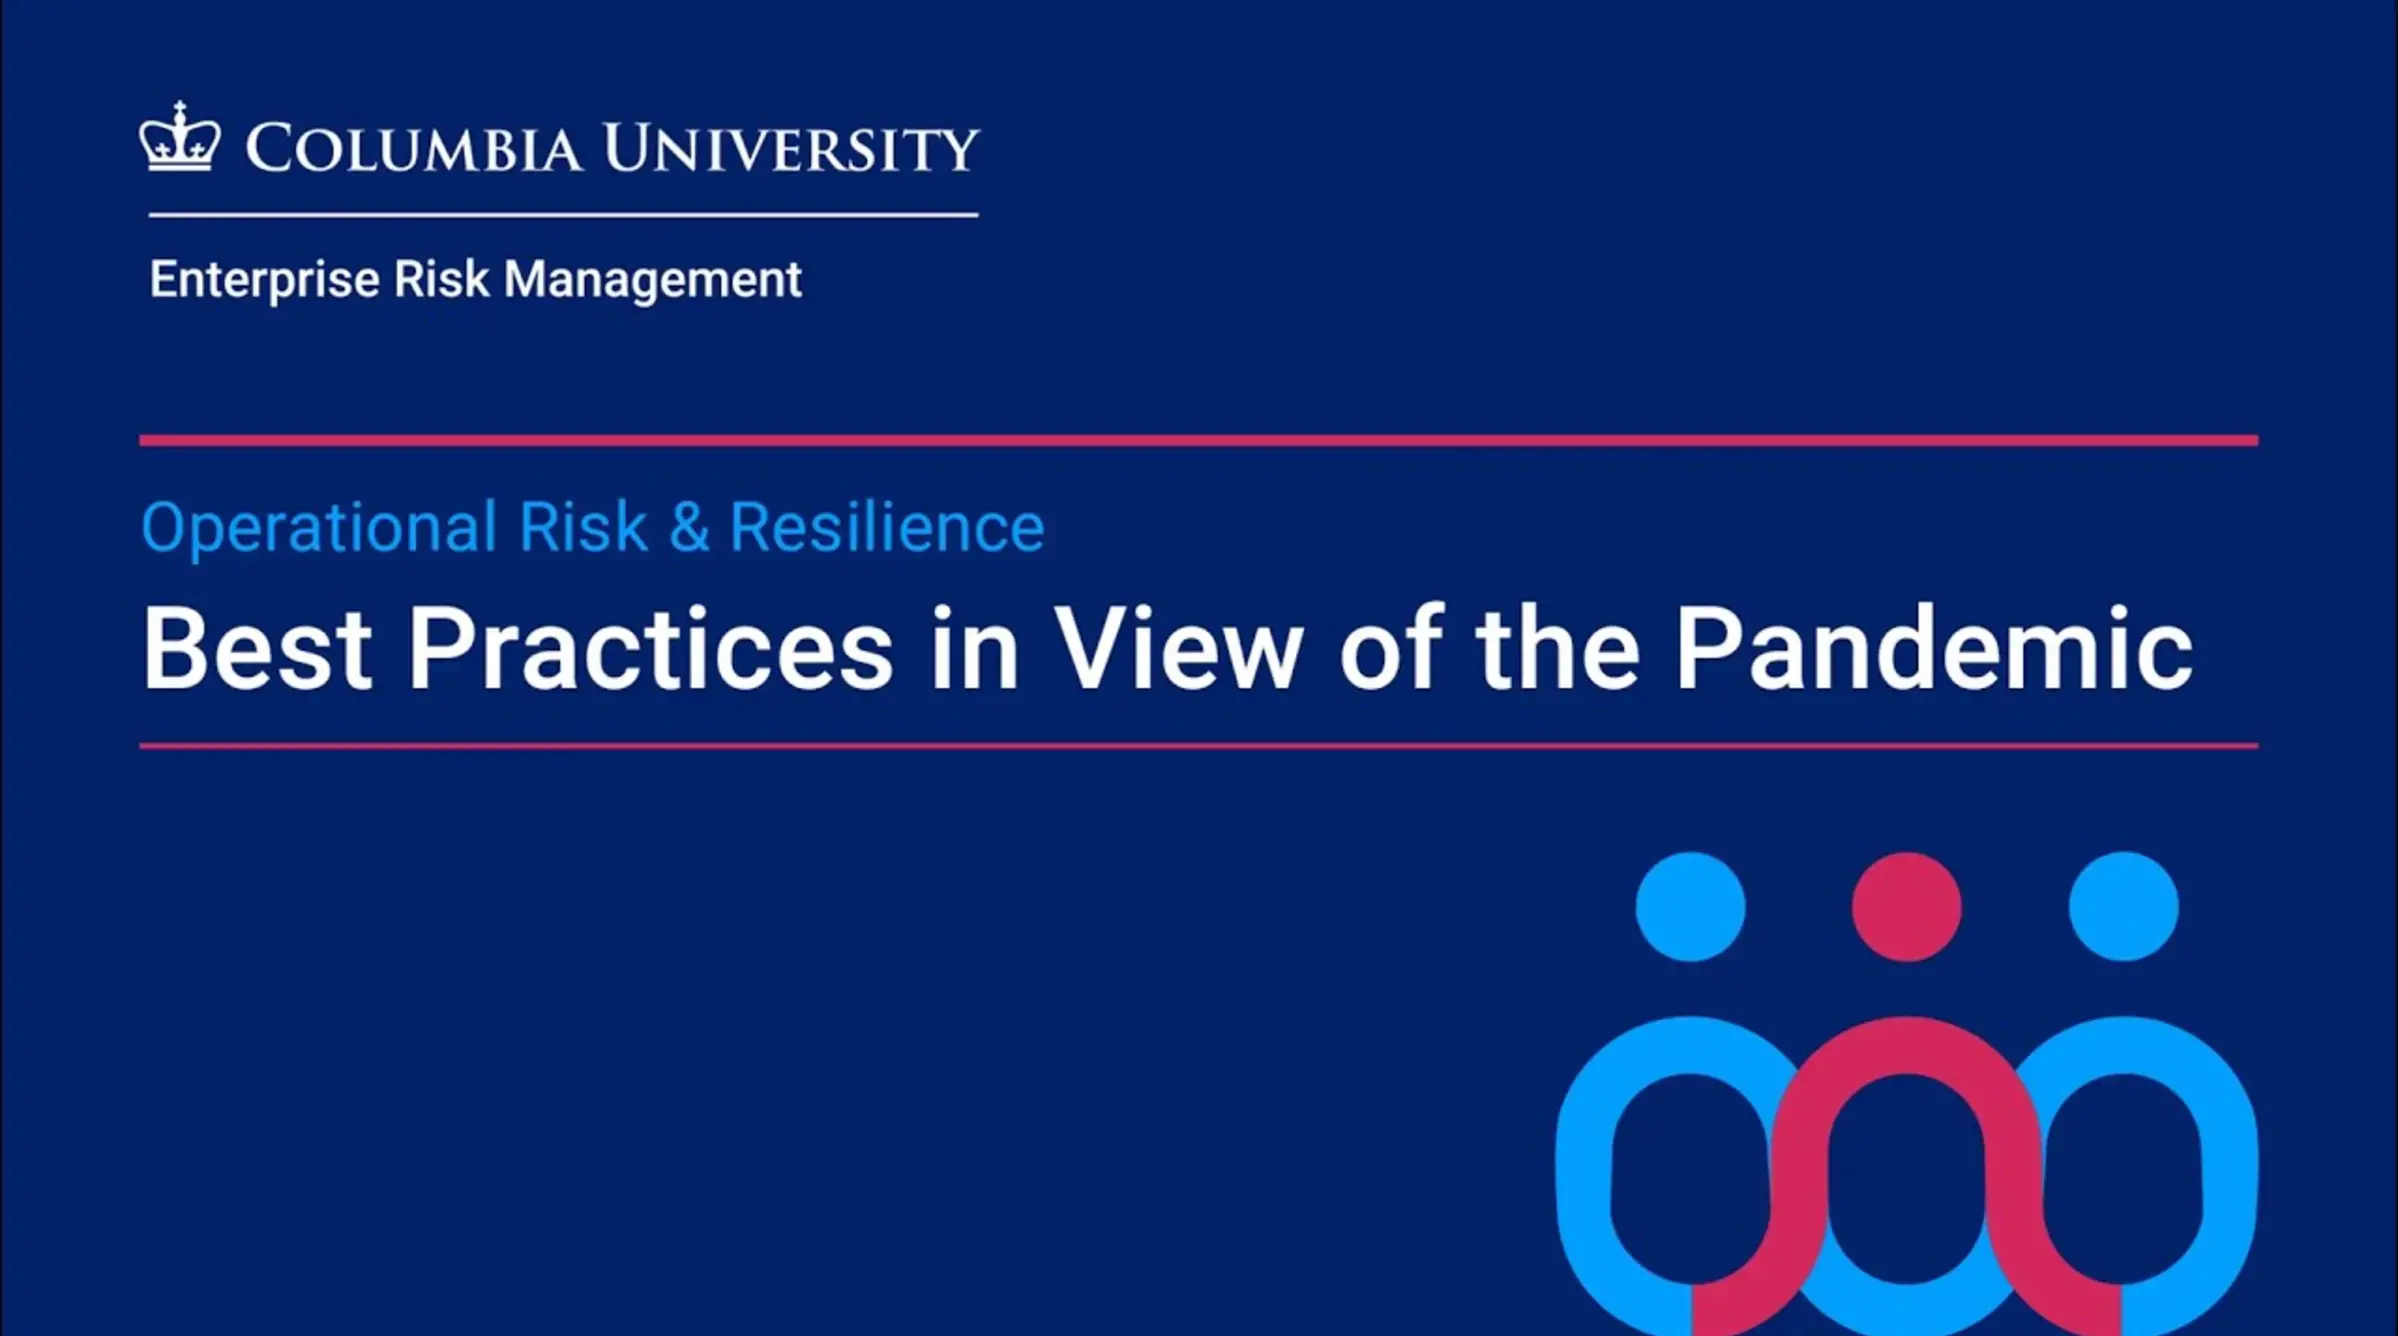 Operational Risk & Resilience: Best Practices in View of the Pandemic